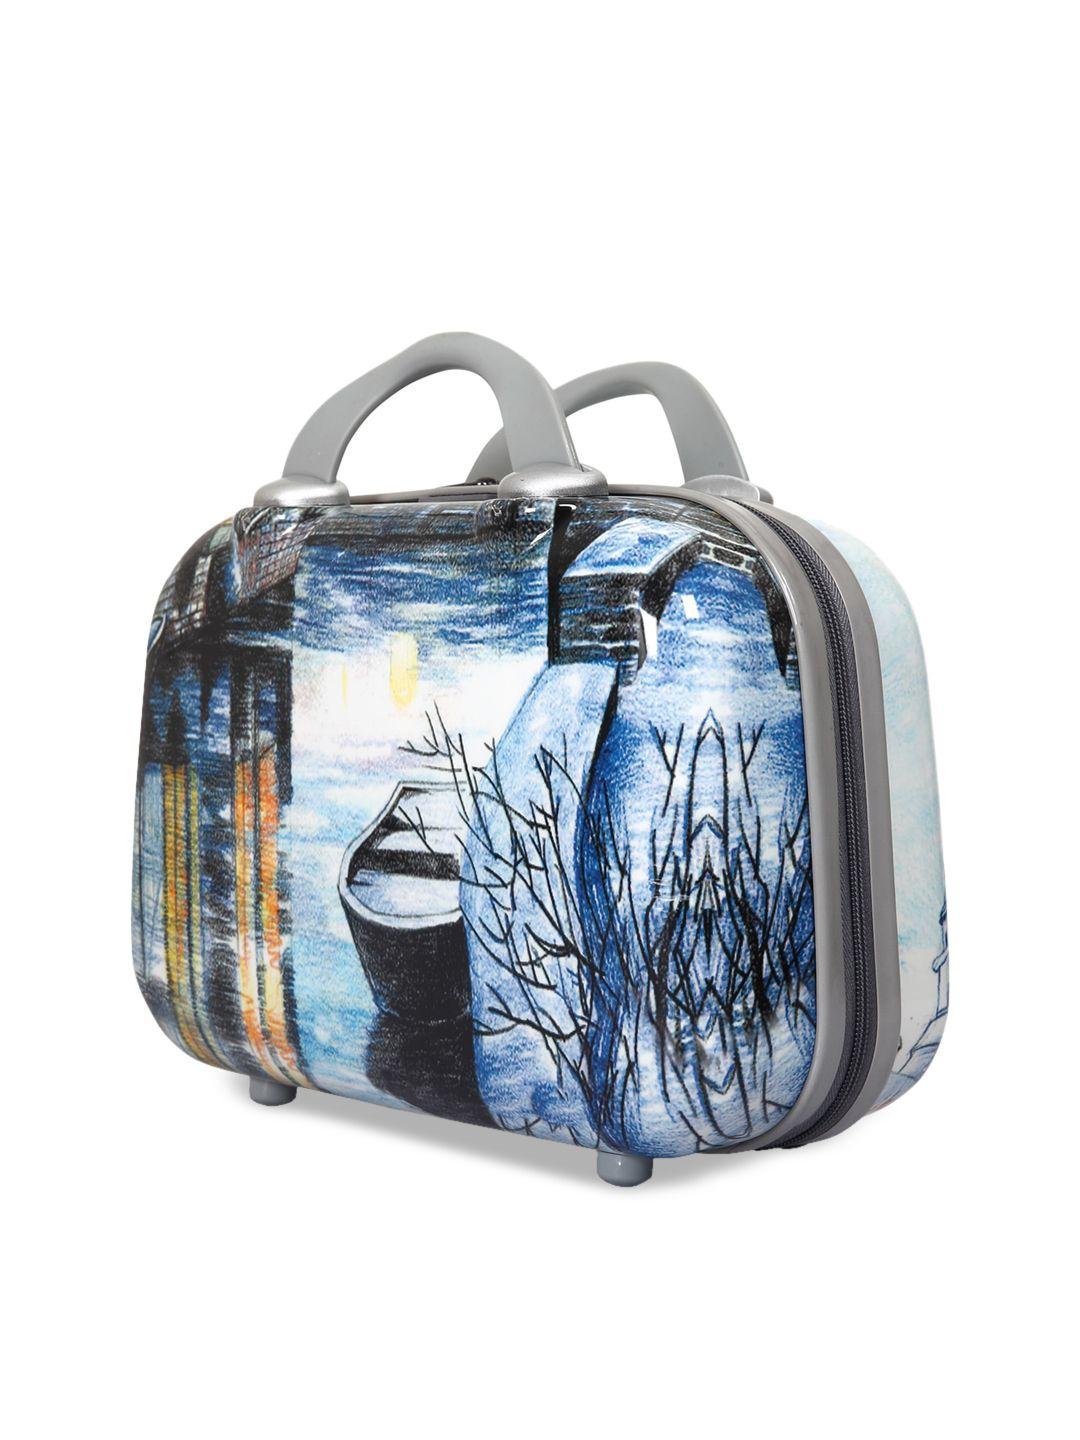 polo class blue & white printed hard-sided vanity bag